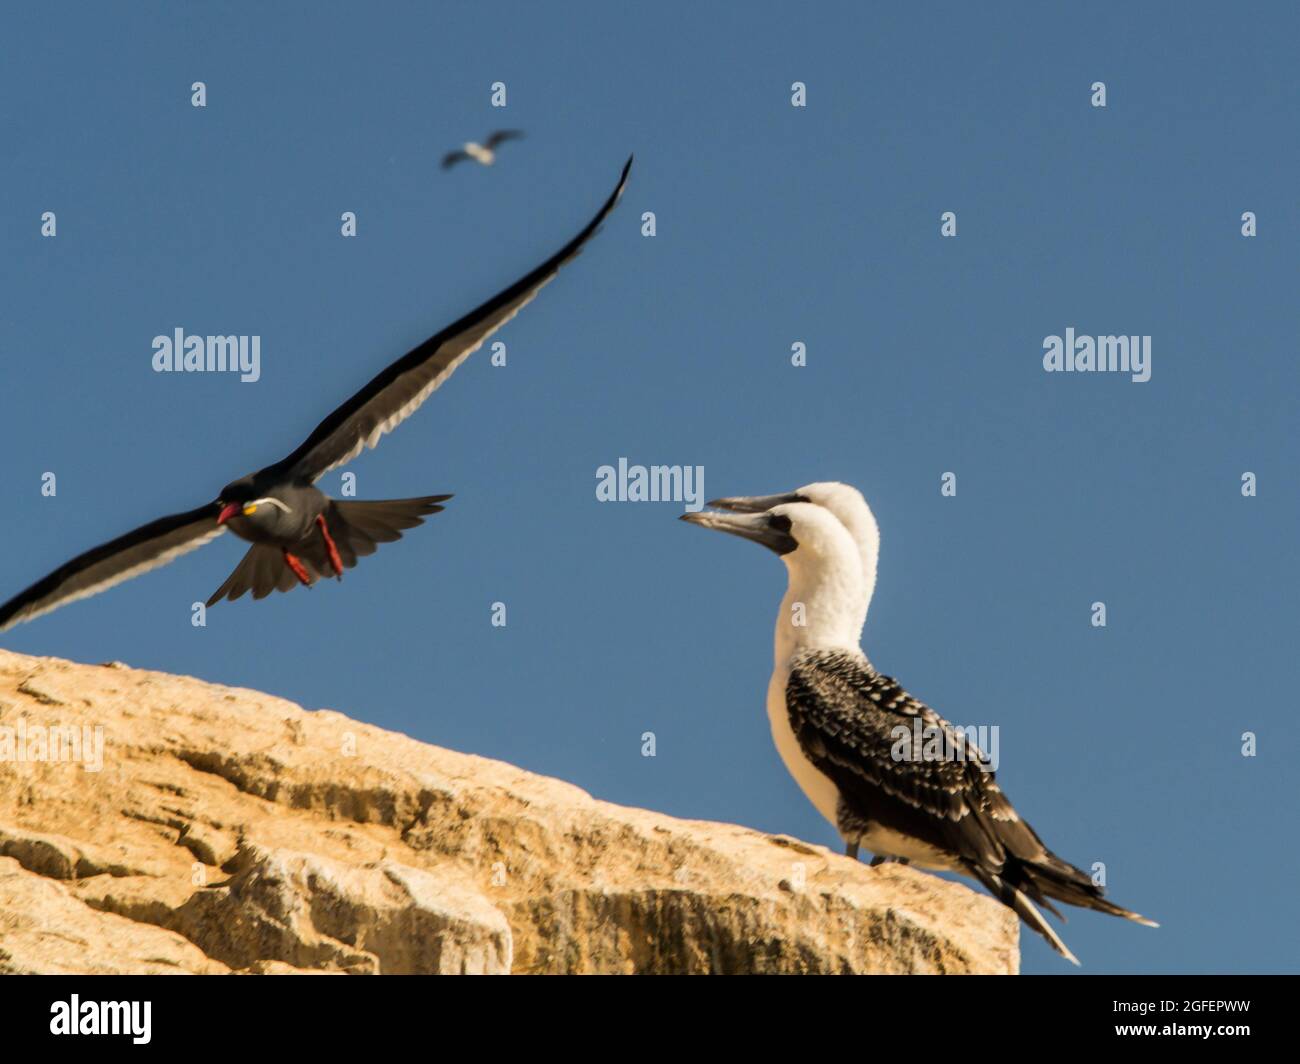 Peruvian booby (Sula variegata) sitting on a rock and flying inca terns (Larosterna Inca) in Ballestas Islands in the Paracas National Park, Peru. Stock Photo